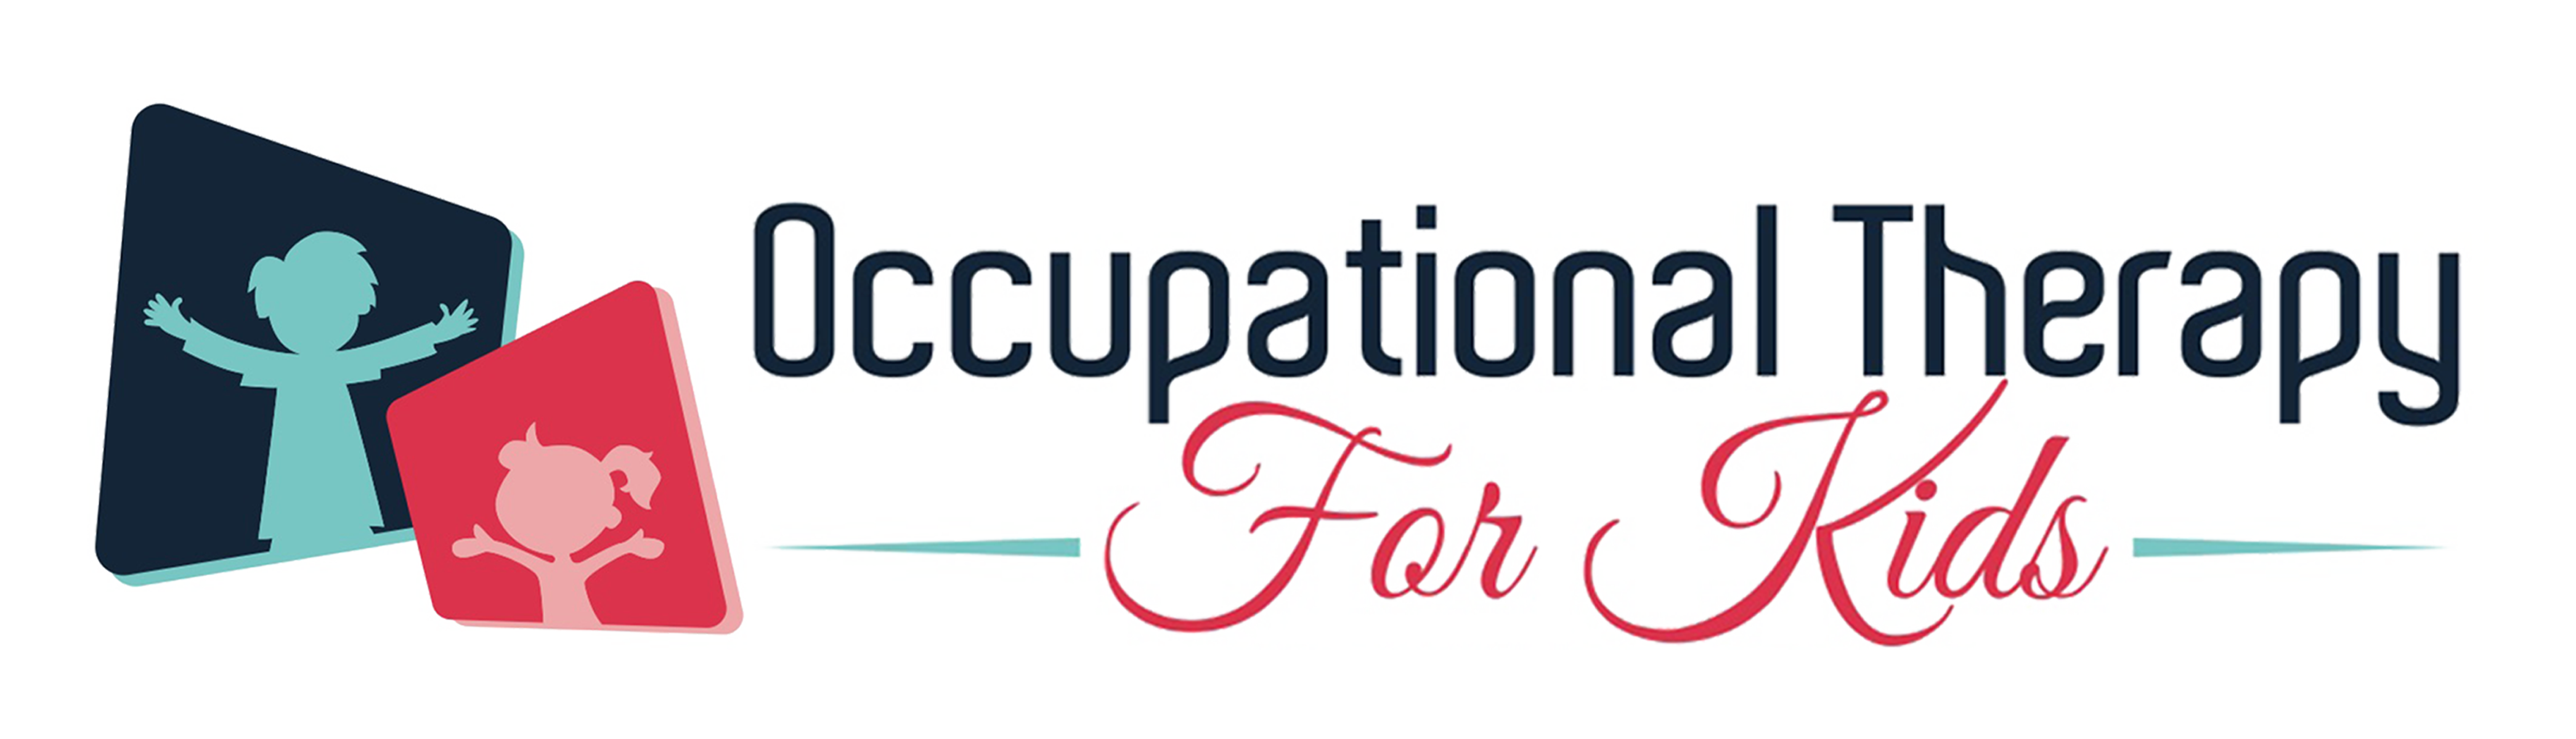 Occupational Therapy For Kids logo